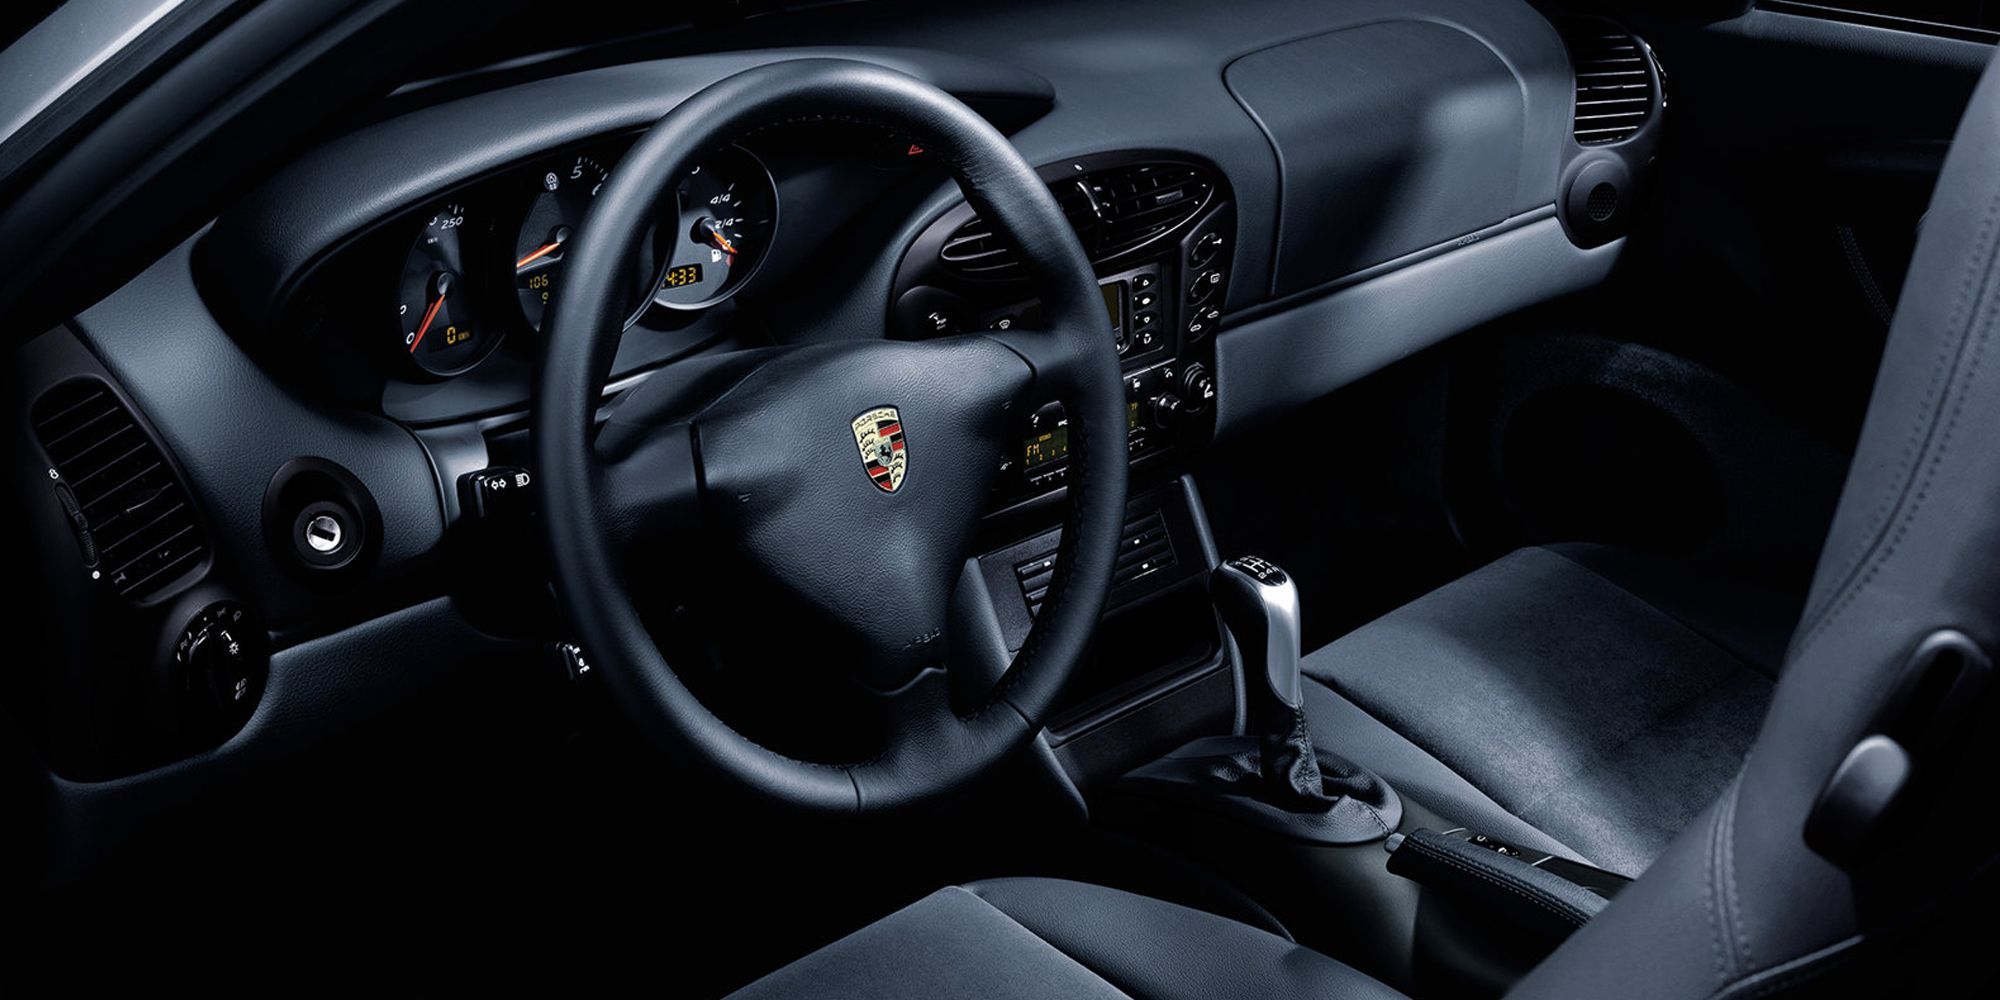 The interior of the pre-facelift 986 Boxster, in black